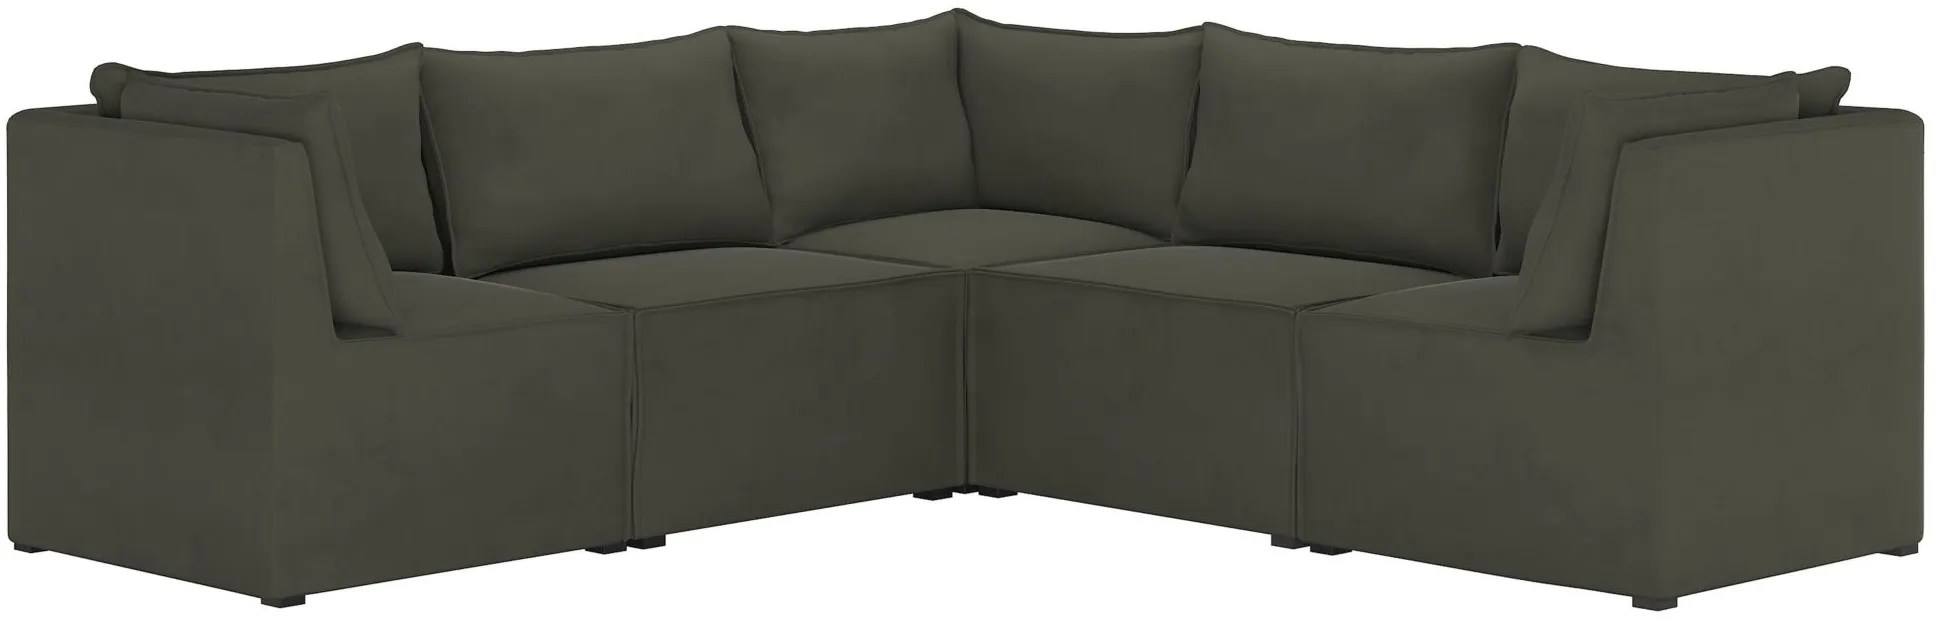 Stacy III 5-pc. Symmetrical Sectional Sofa in Velvet Pewter by Skyline